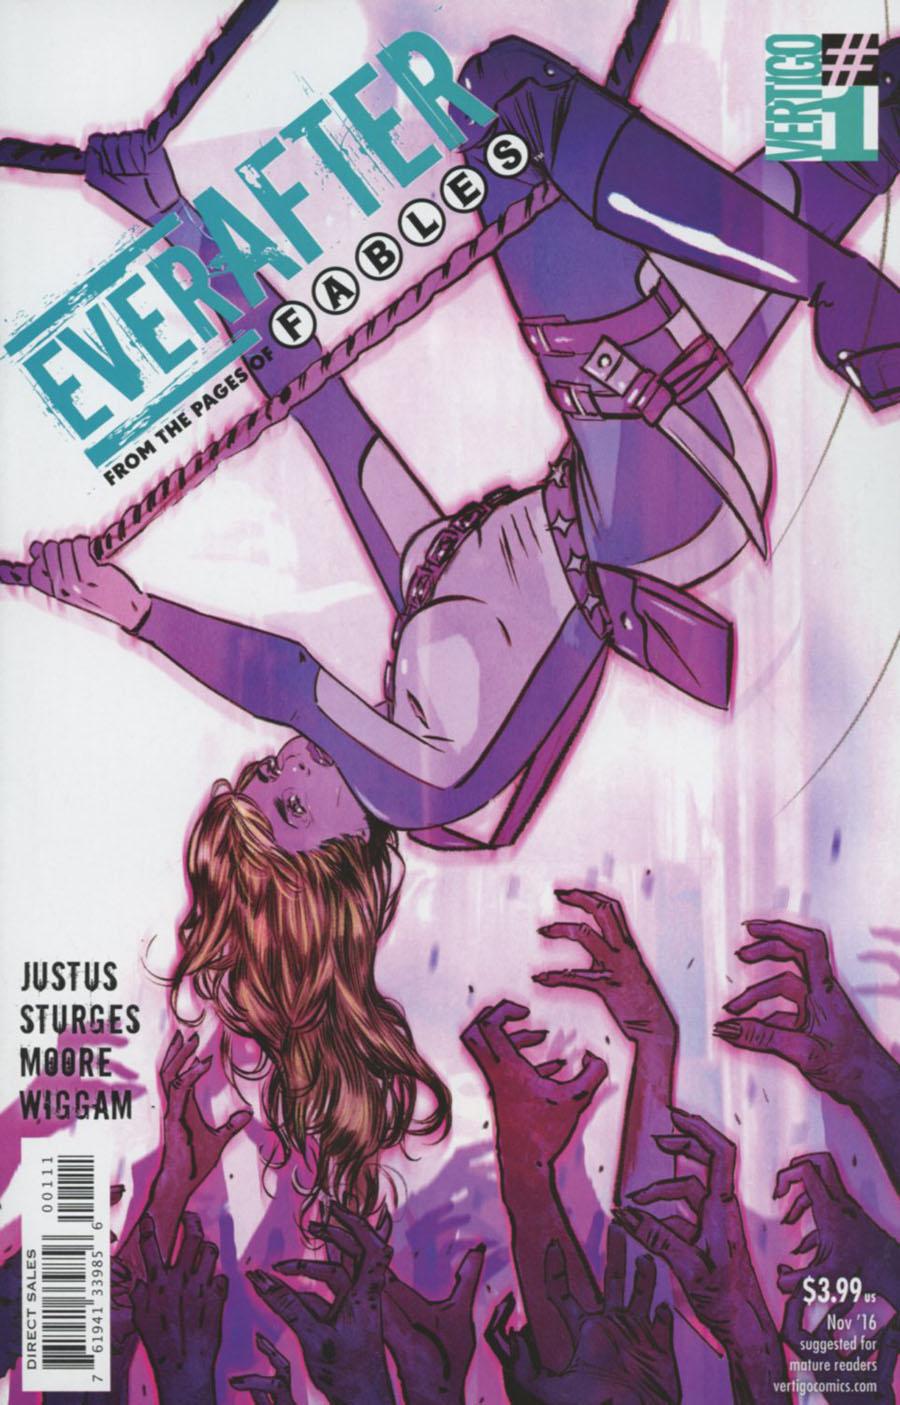 Everafter From The Pages Of Fables Vol. 1 #1